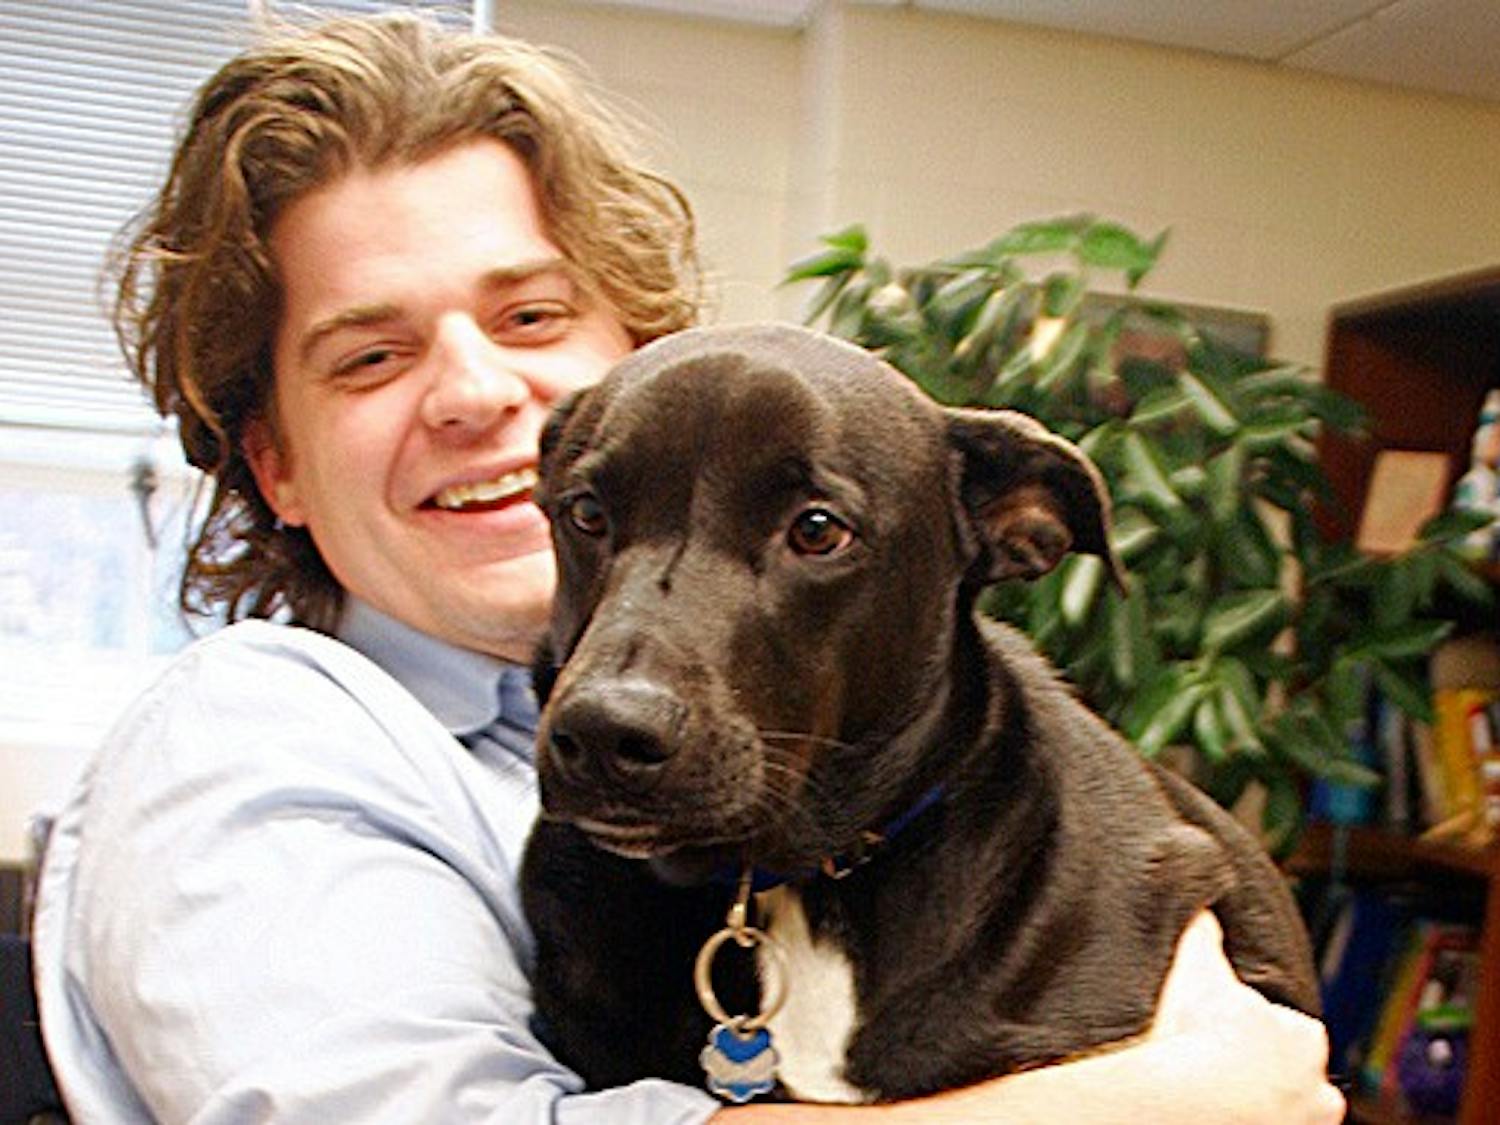 Brian Hare is the director of the Duke Canine Cognition Center, which studies dogs to better understand their cognitive abilities.